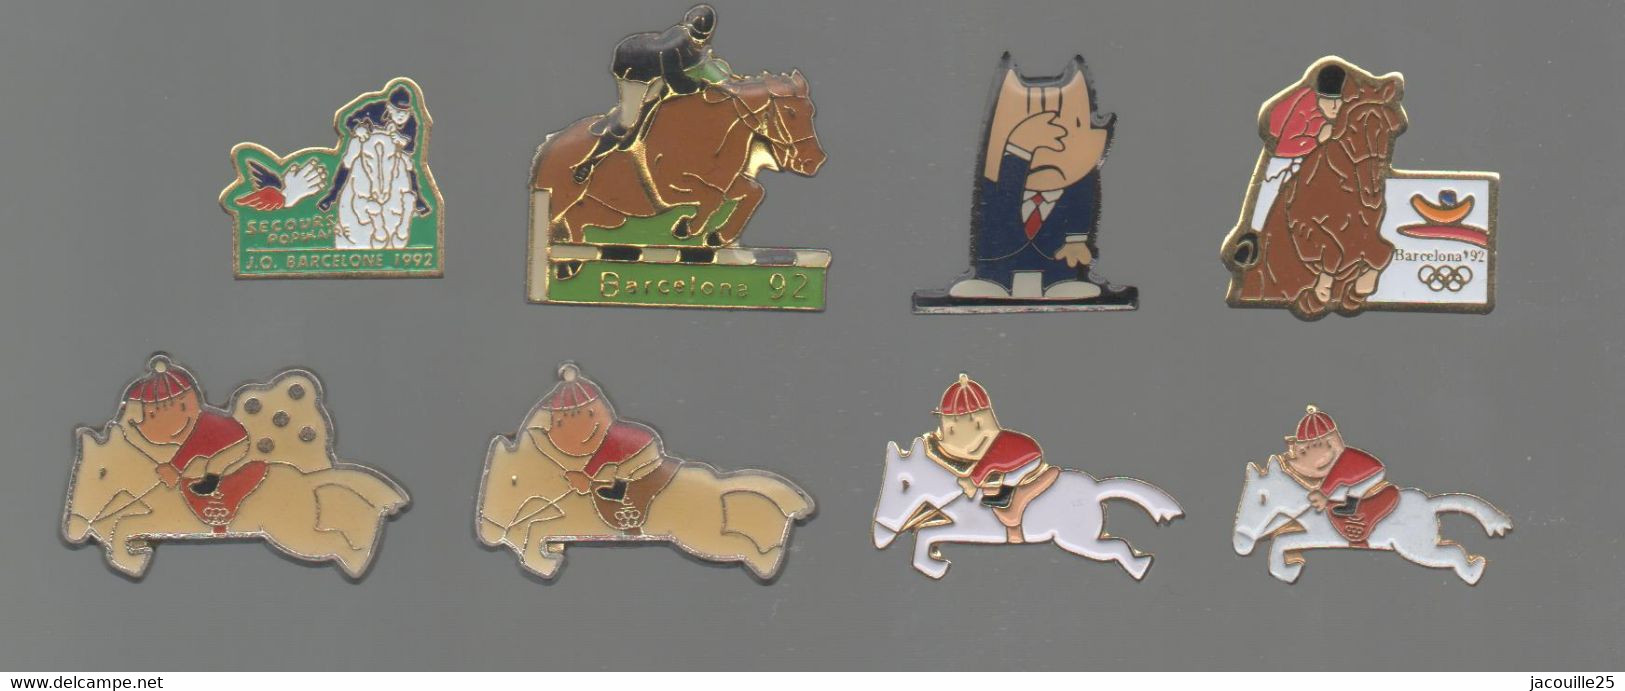 PINS PIN'S 994 JO BARCELONA 92 JEUX OLYMPIQUES BARCELONE CHEVAL EQUITATION  SECOURS POPULAIRE   LOT 8 PINS - Natation